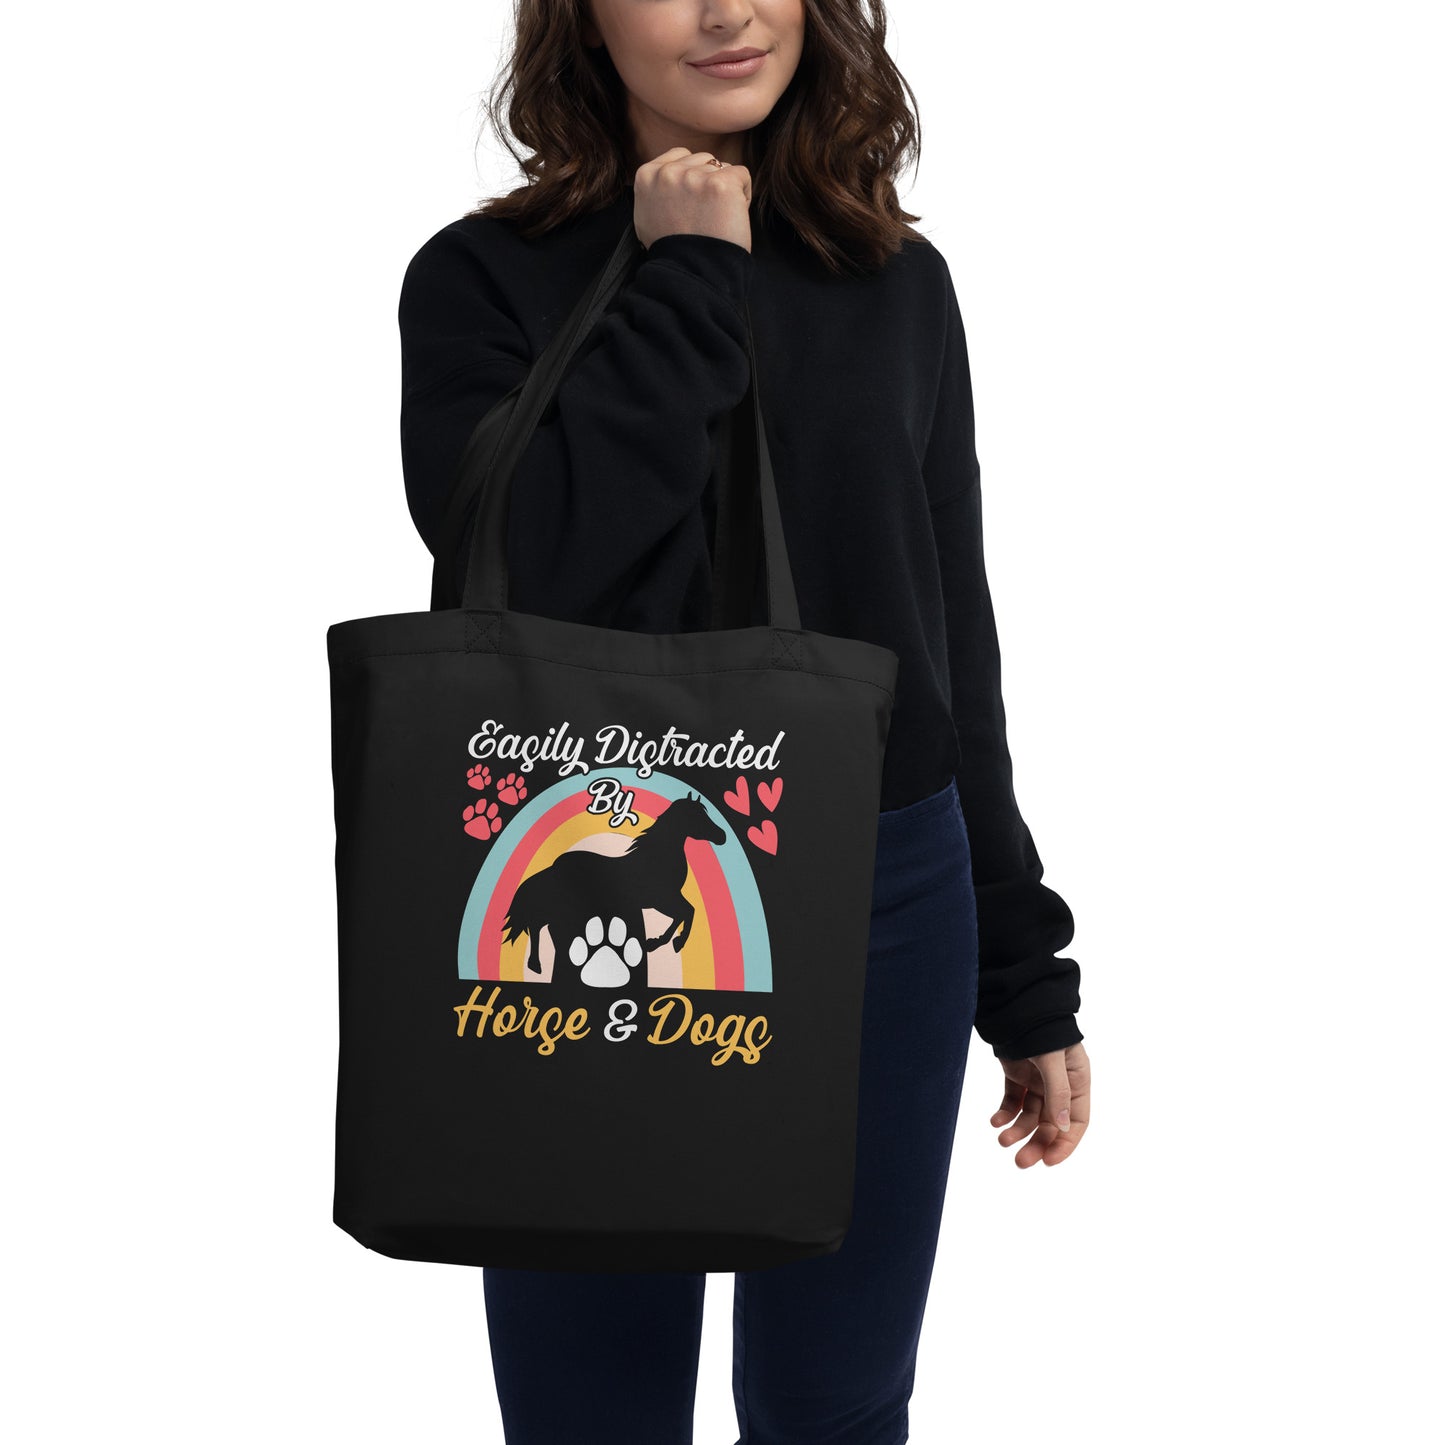 Easily Distracted by Horse & Dogs Eco Tote Bag